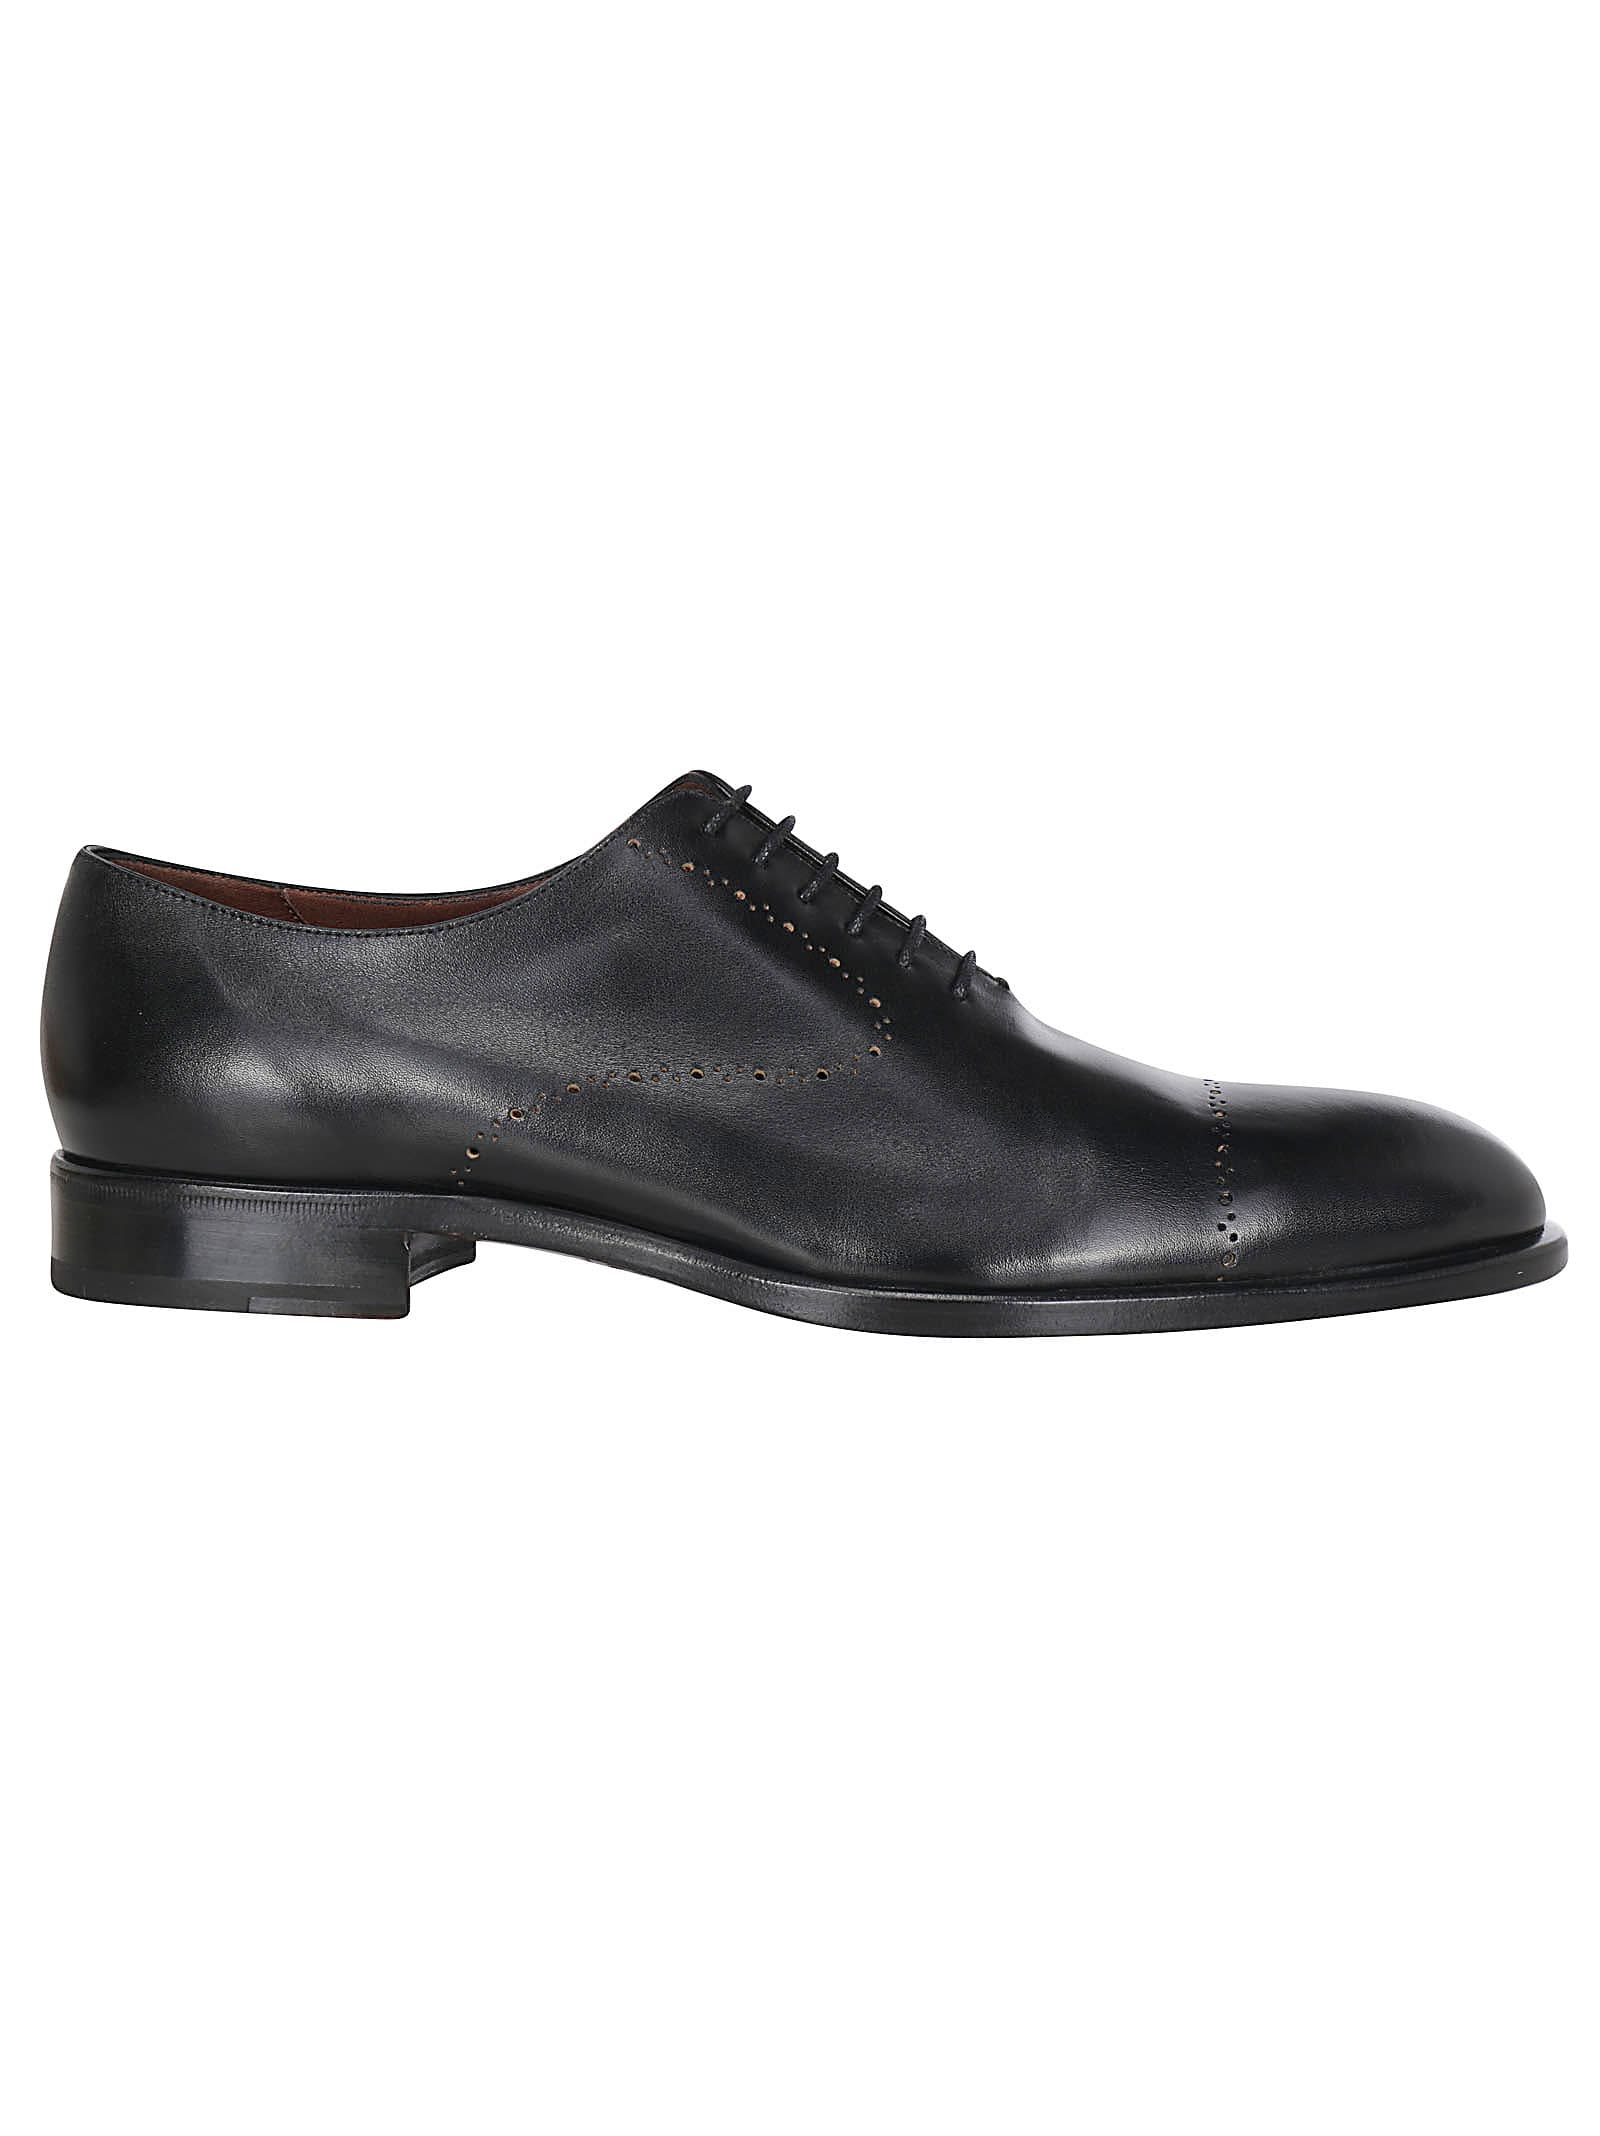 FRATELLI ROSSETTI DERBY SHOES,11256858